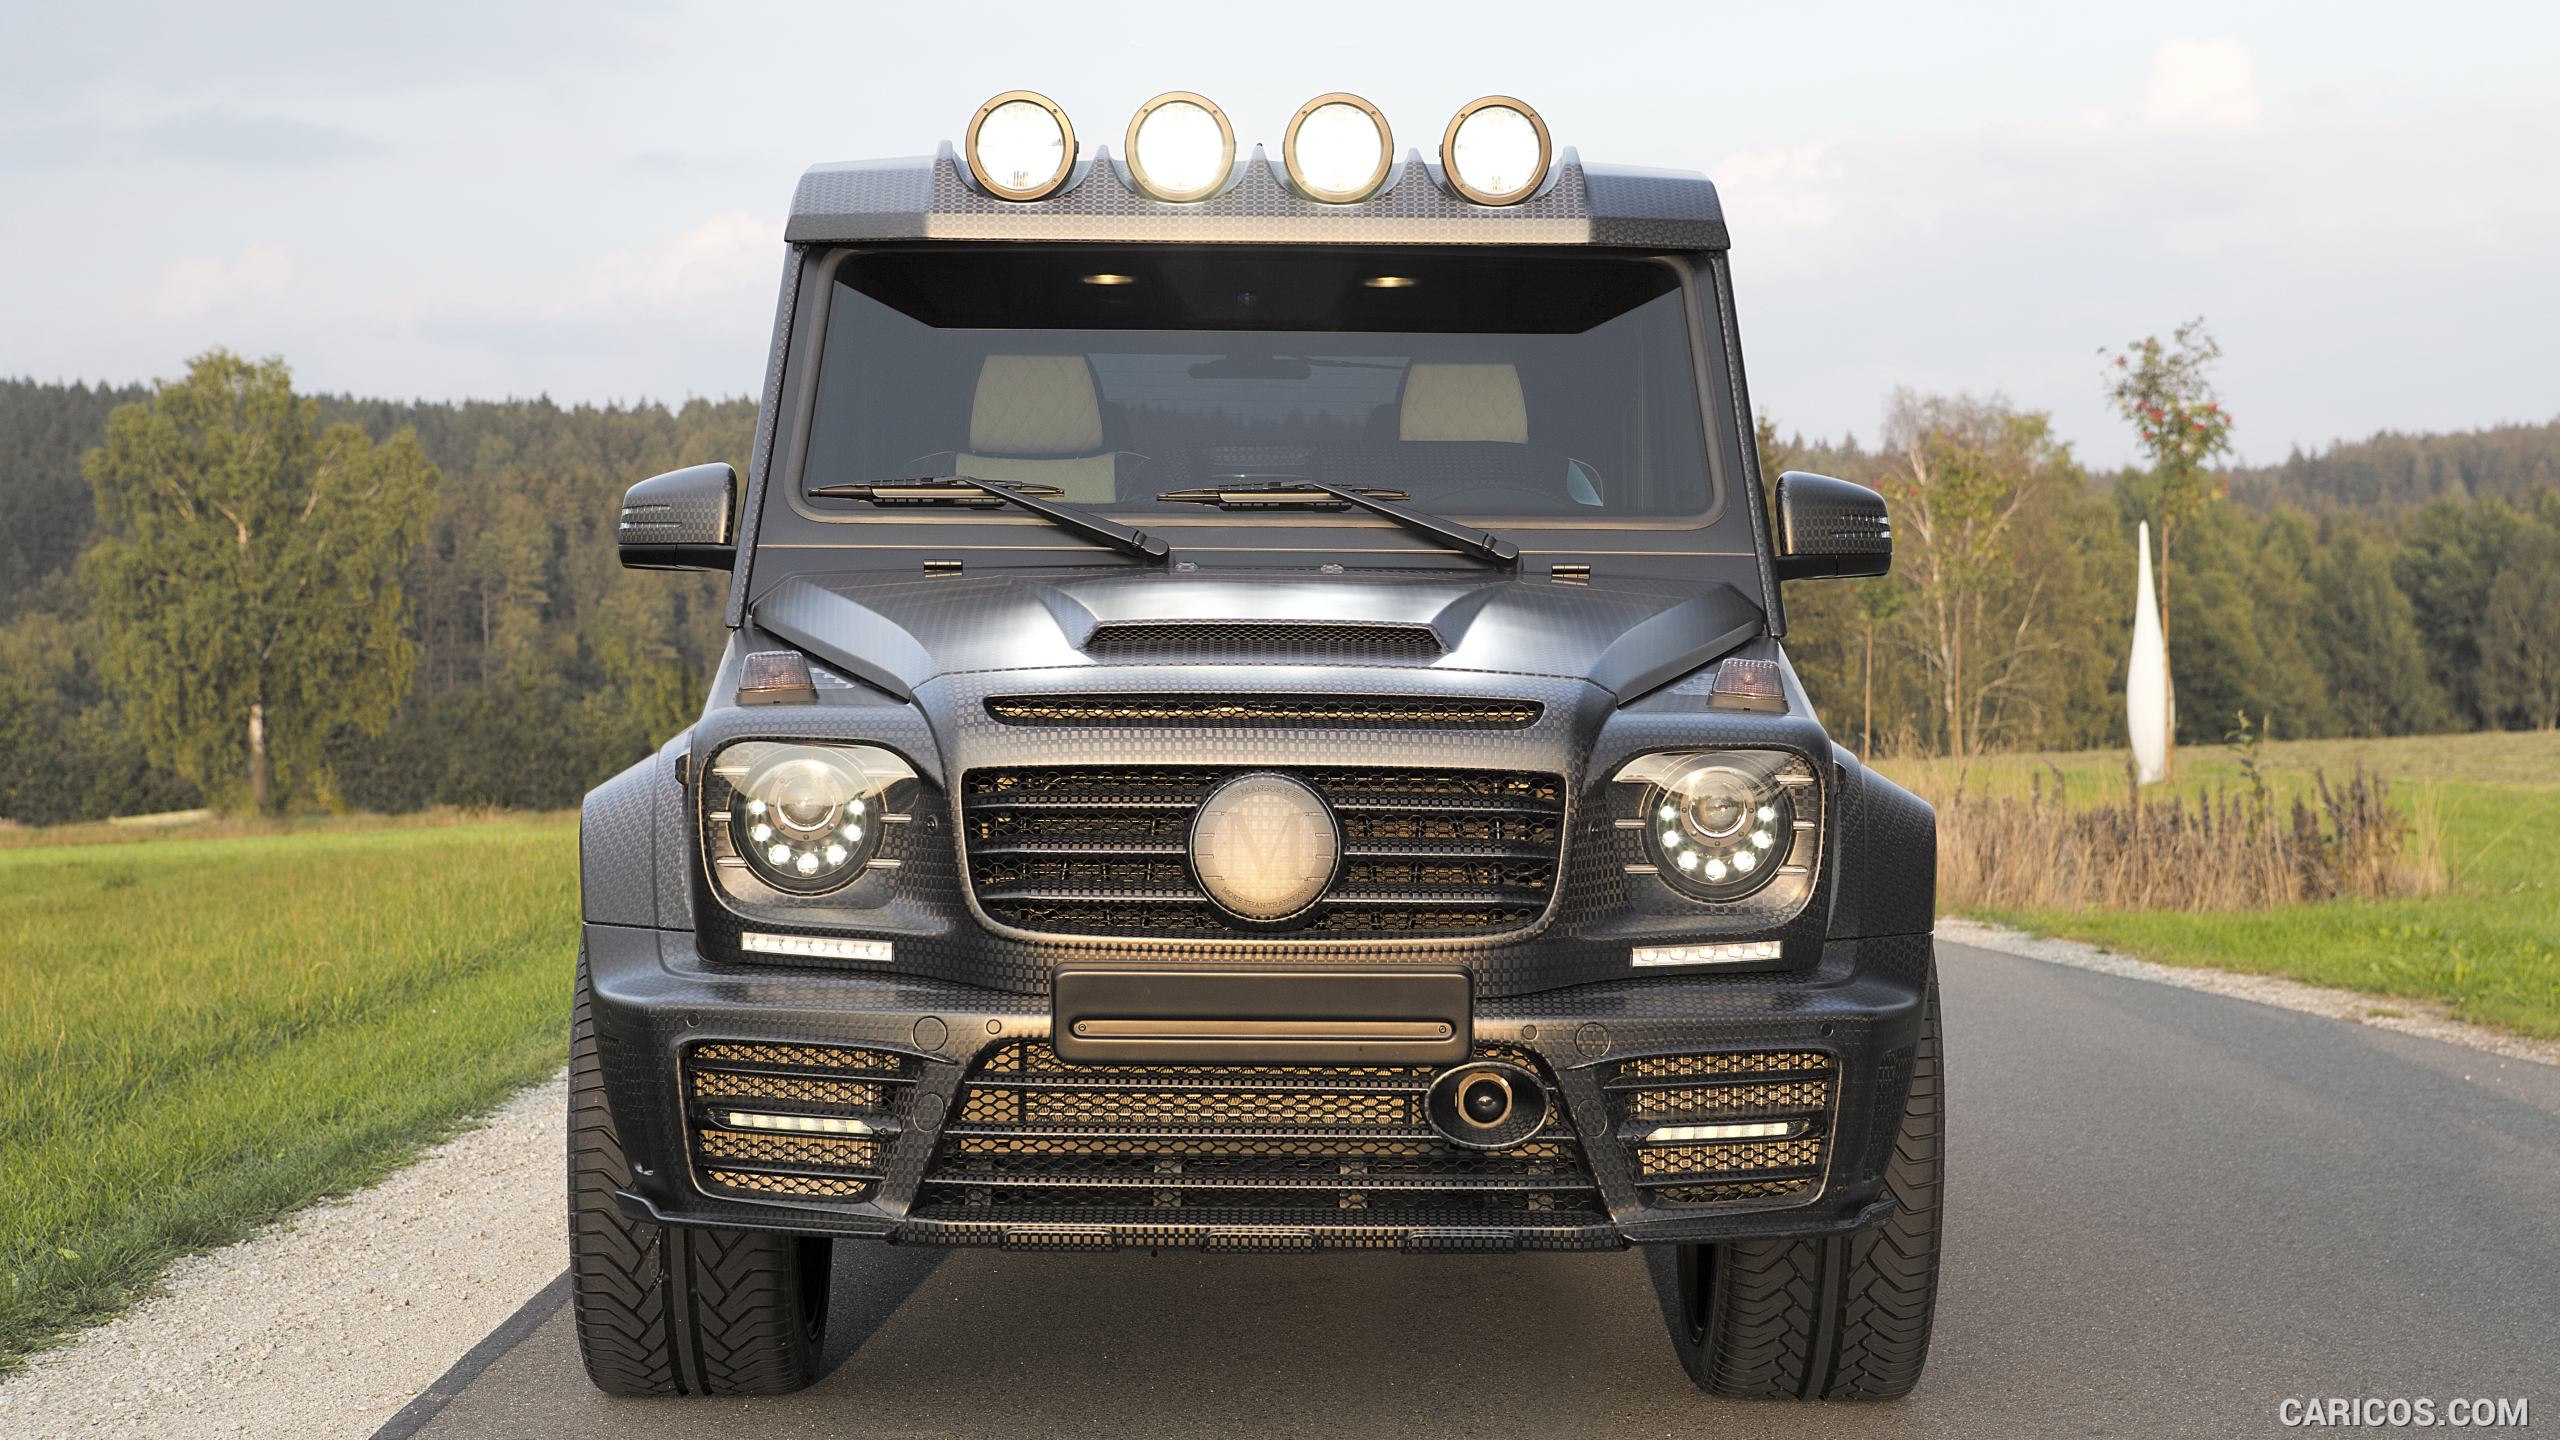 2016 MANSORY GRONOS Black Edition based on Mercedes G63 AMG - Front, #3 of 16